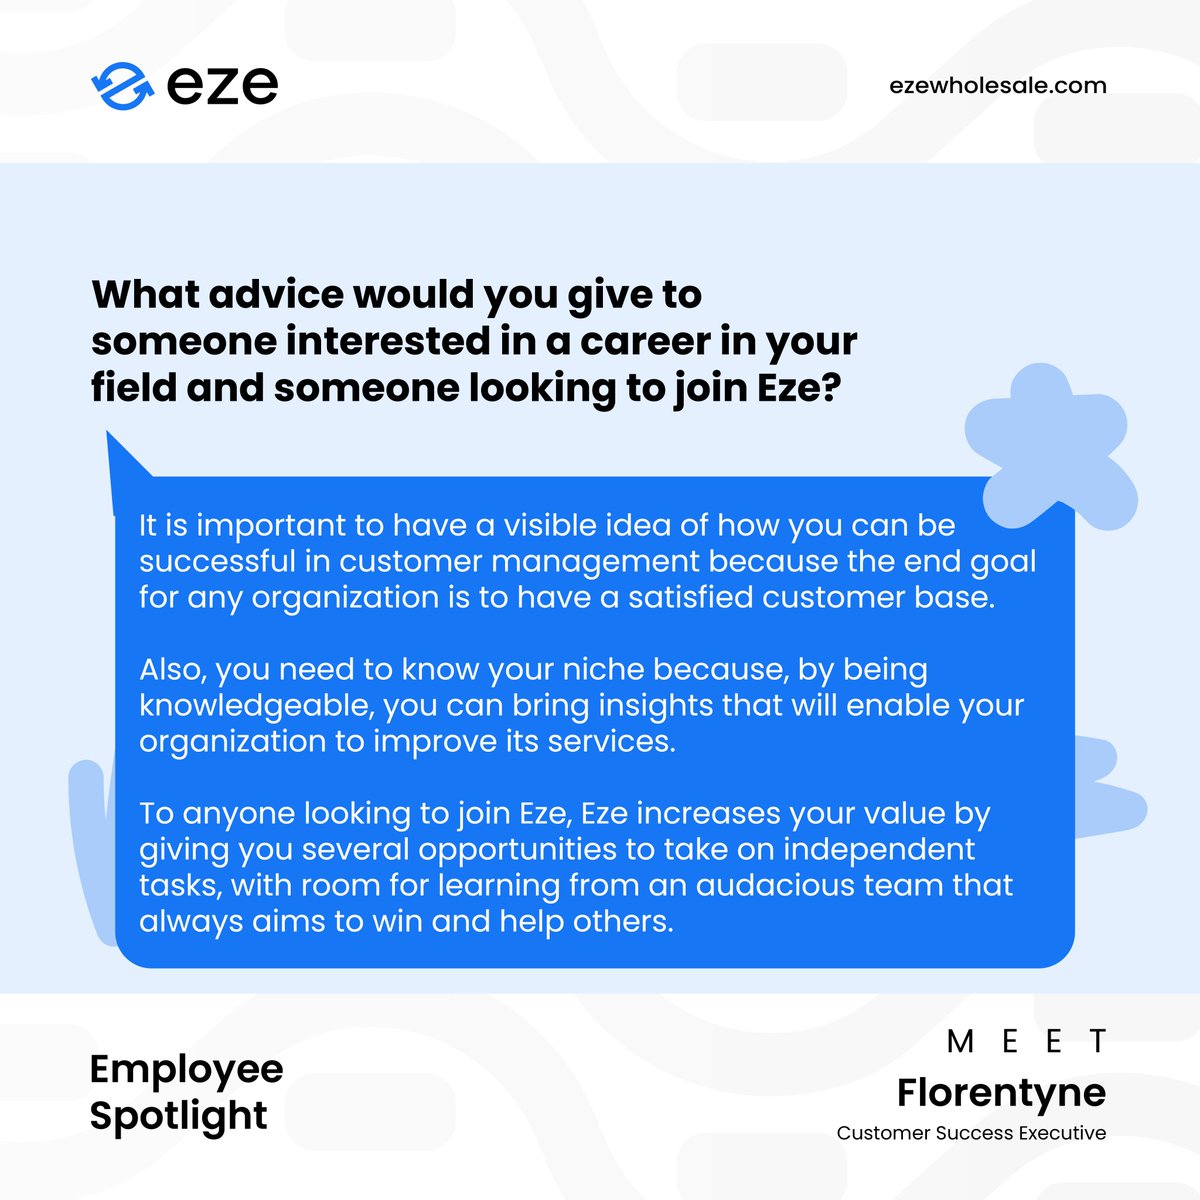 Meet Flo, the Eze Customer Success Superstar✨

Read up on what she’s been up to at Eze and why she loves being part of our team.

Since we are expanding, she also shares insights on what new team members can expect.

#LifeAtEze #CustomerSuccess #EmployeeSpotlight #RemoteWorker